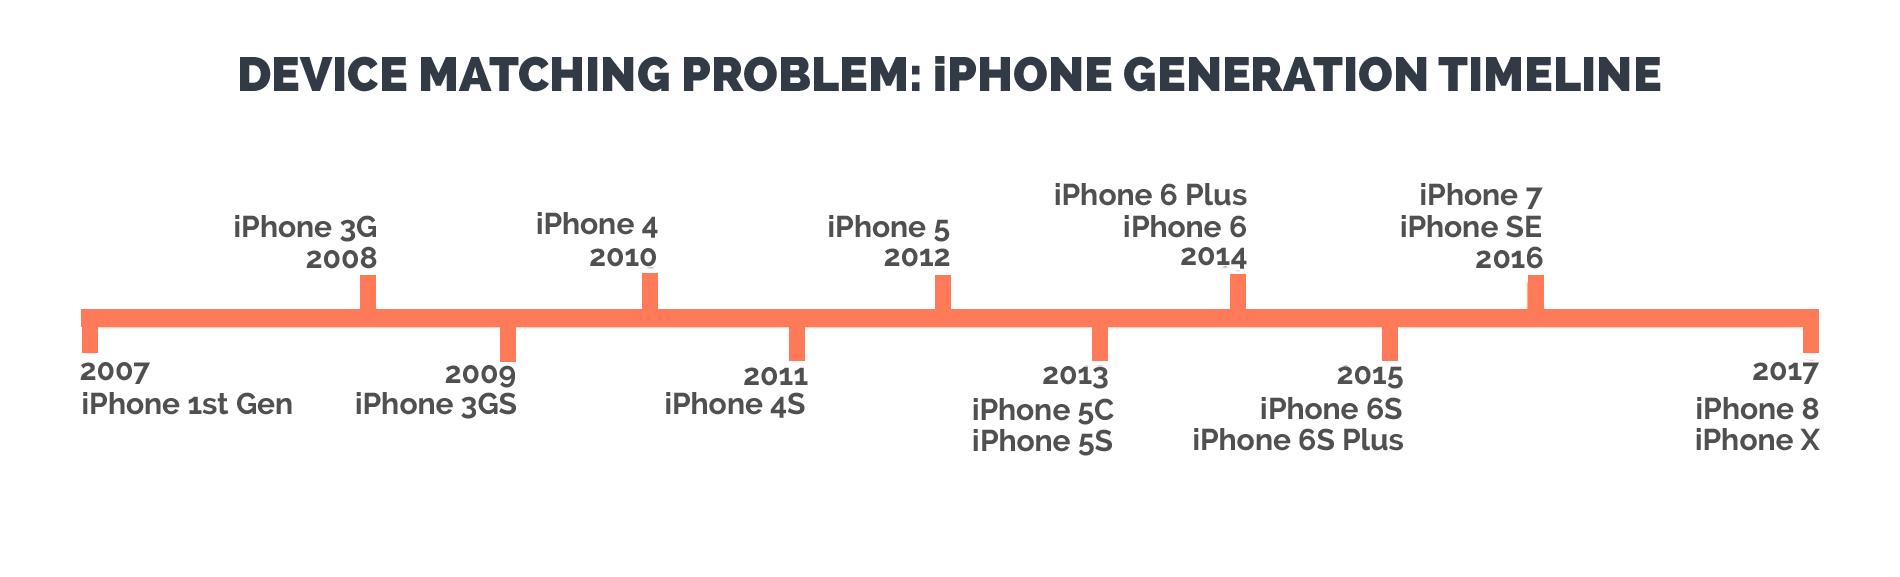 device-matching-problem-iPhone-generation-timeline-graphic-1